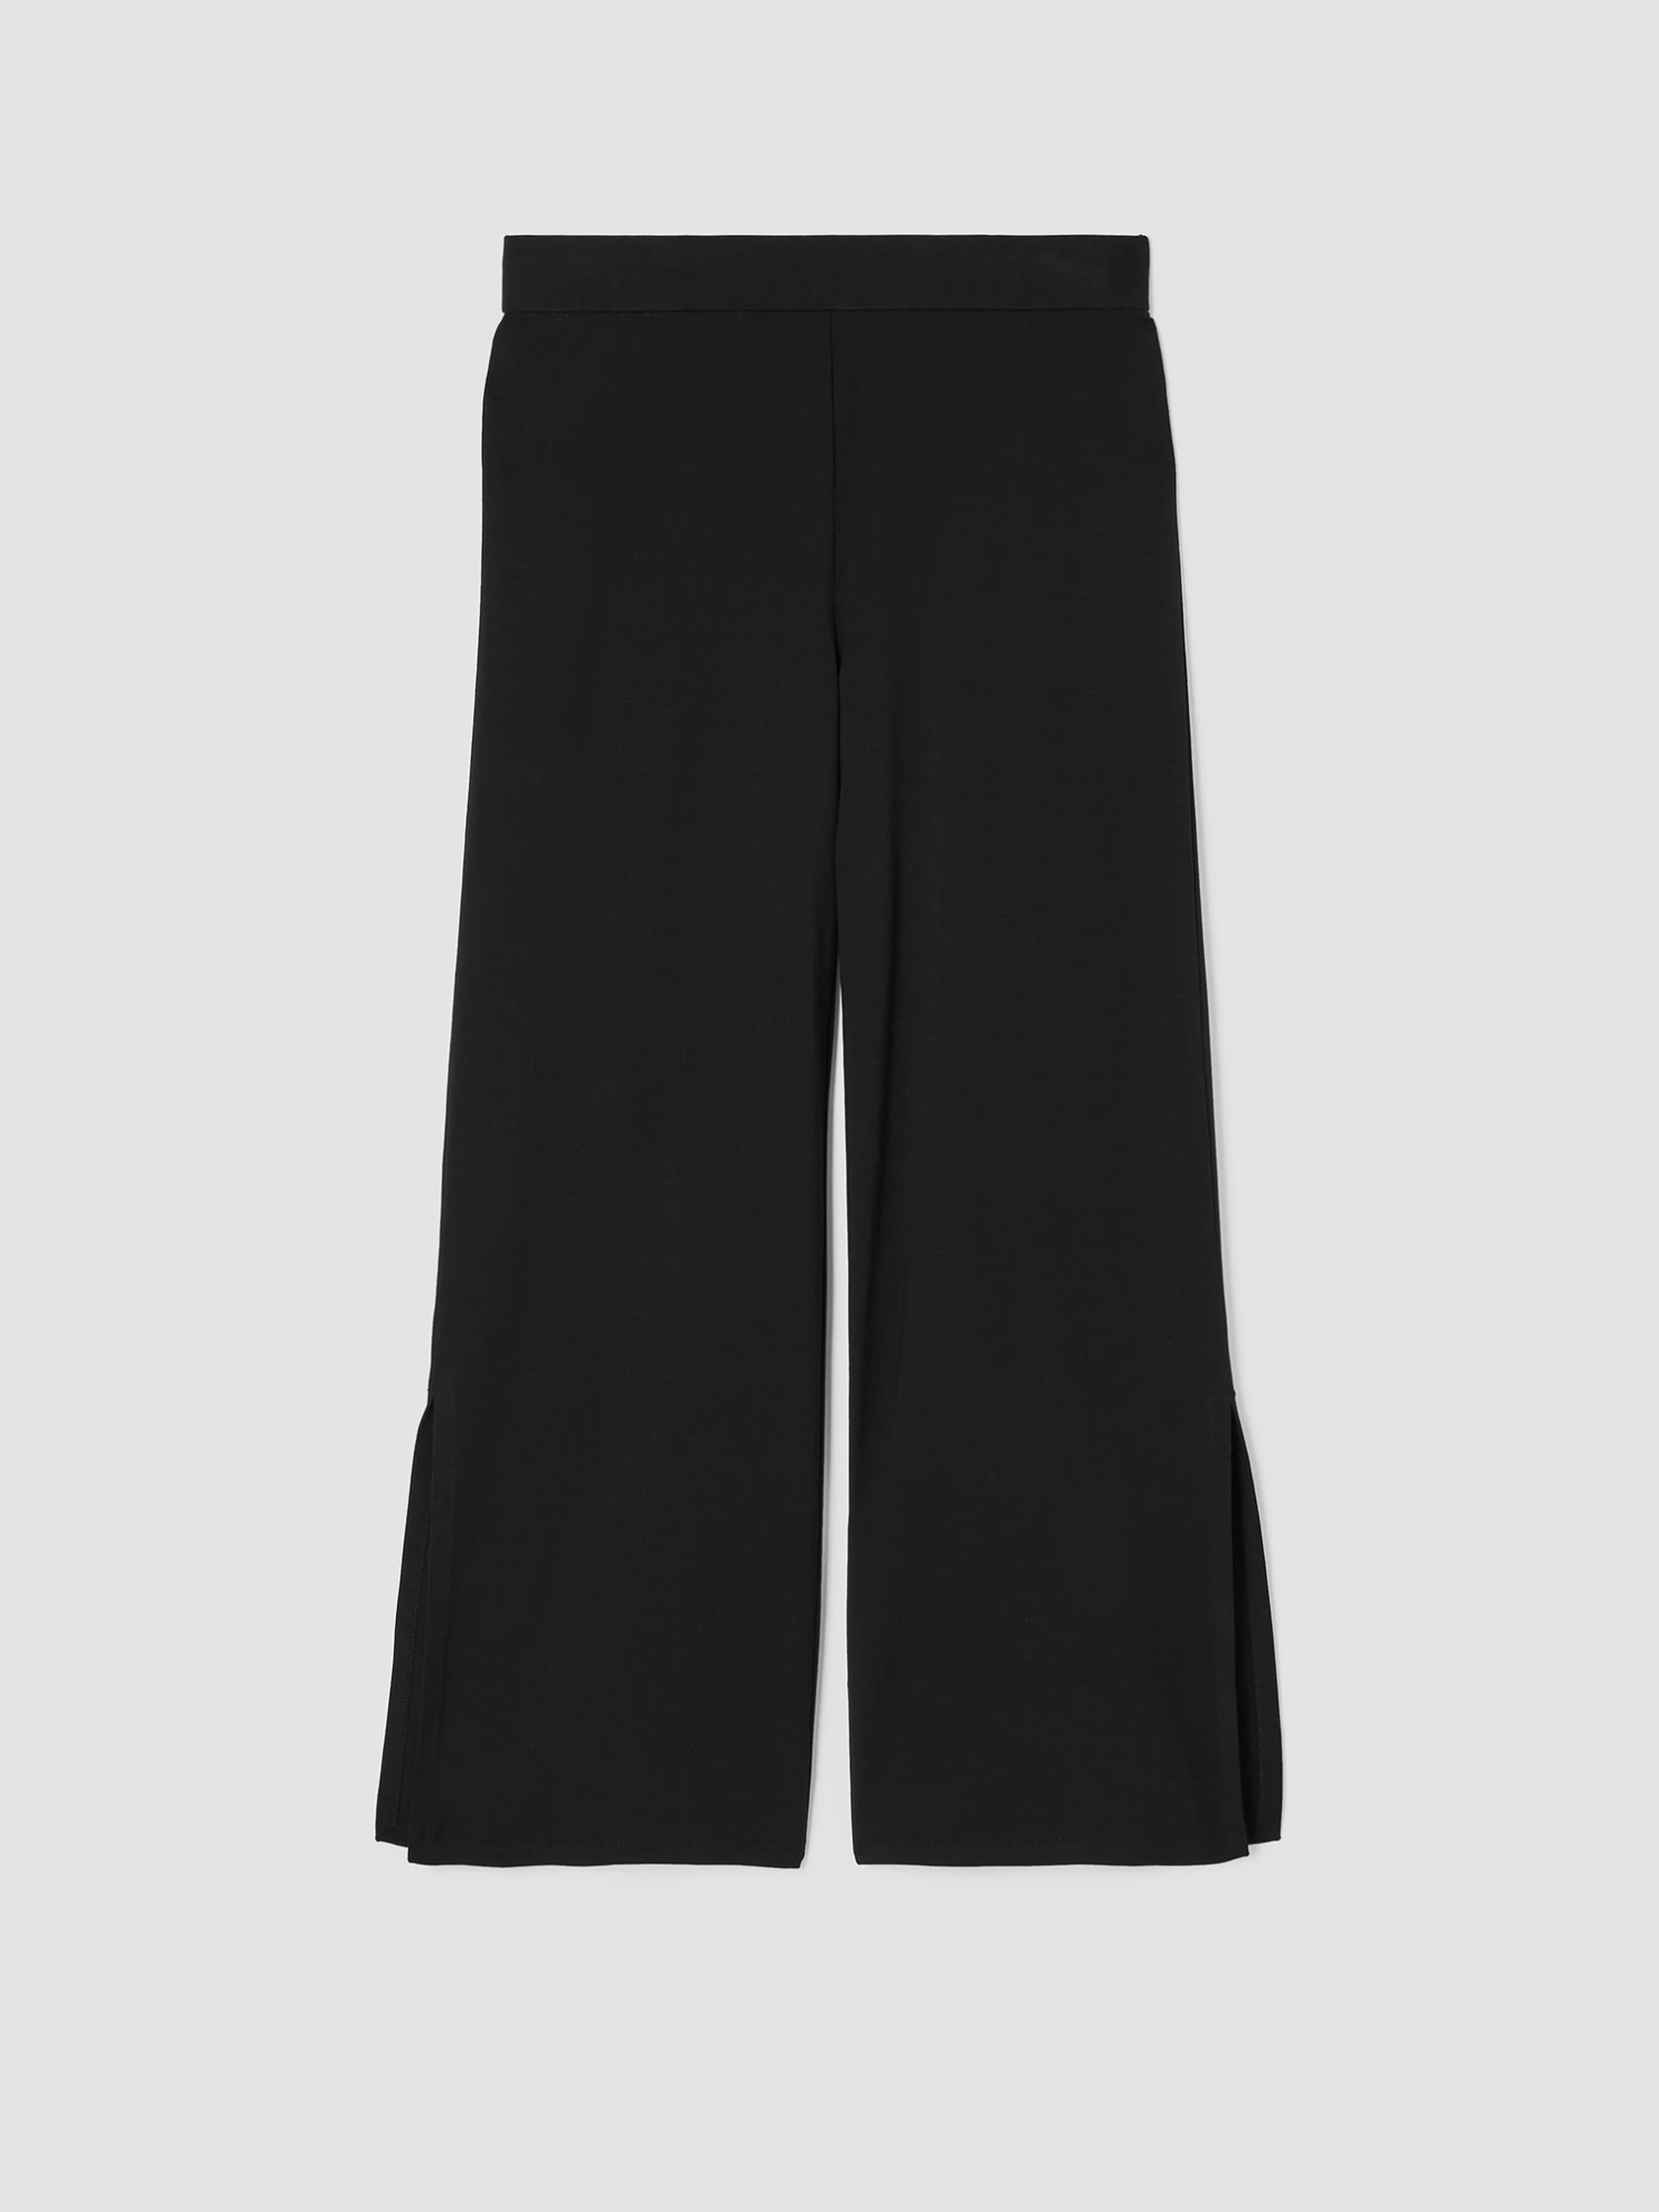 Stretch Jersey Knit Pant with Slits | EILEEN FISHER